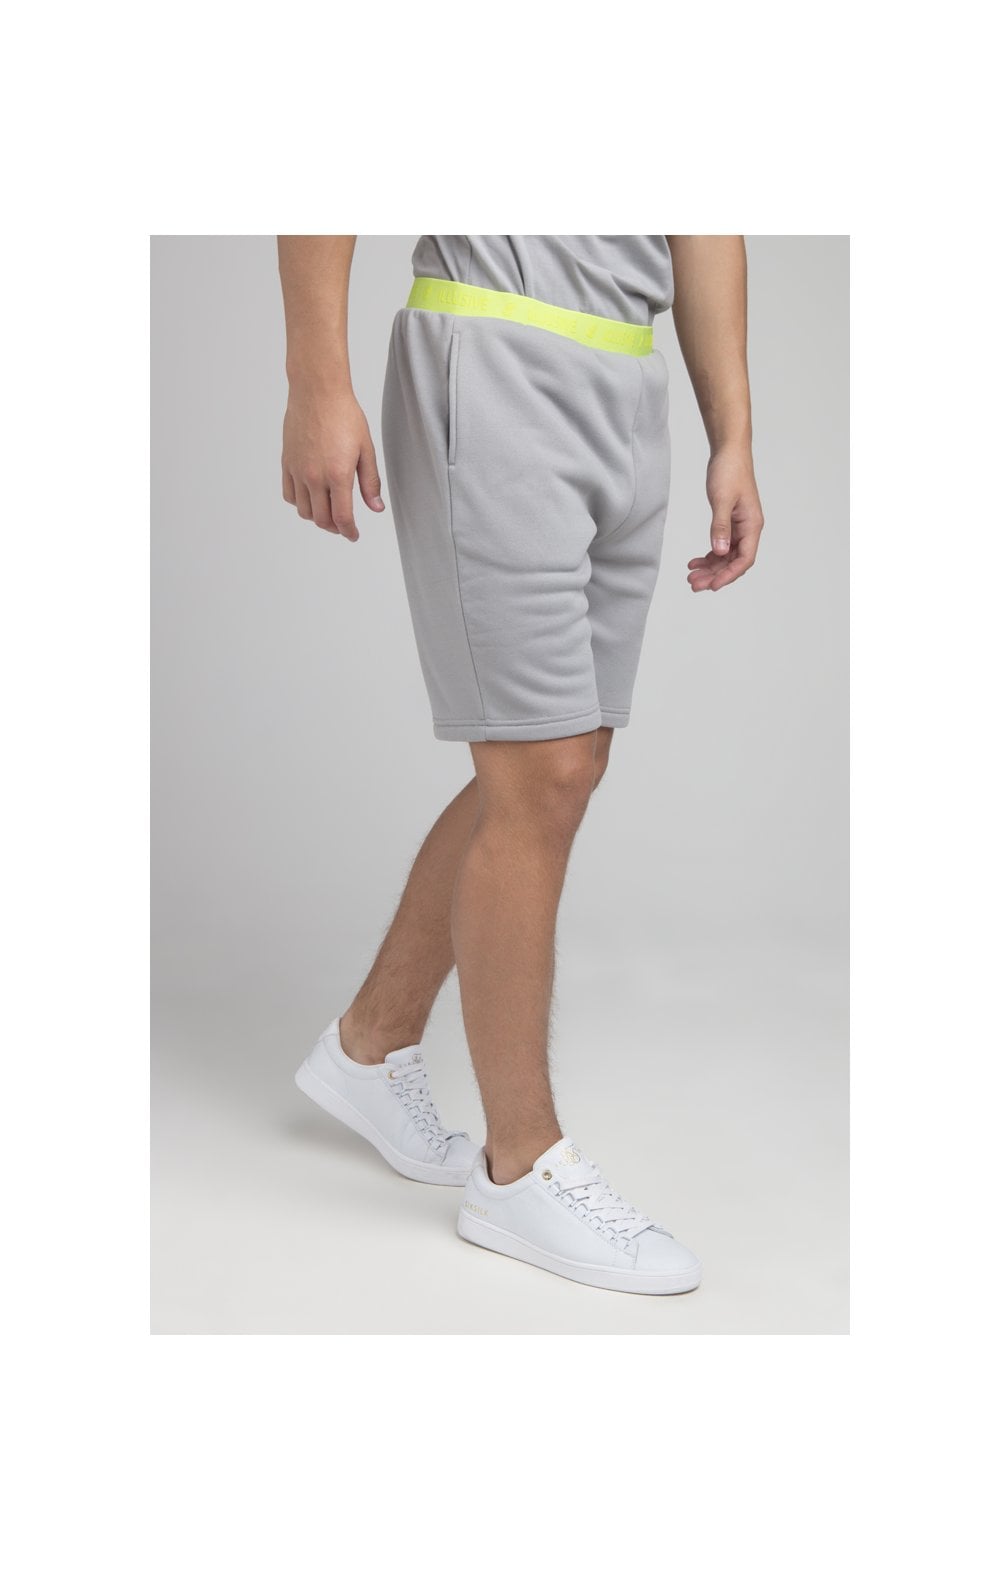 Load image into Gallery viewer, Boys Illusive Grey Taped Short (1)